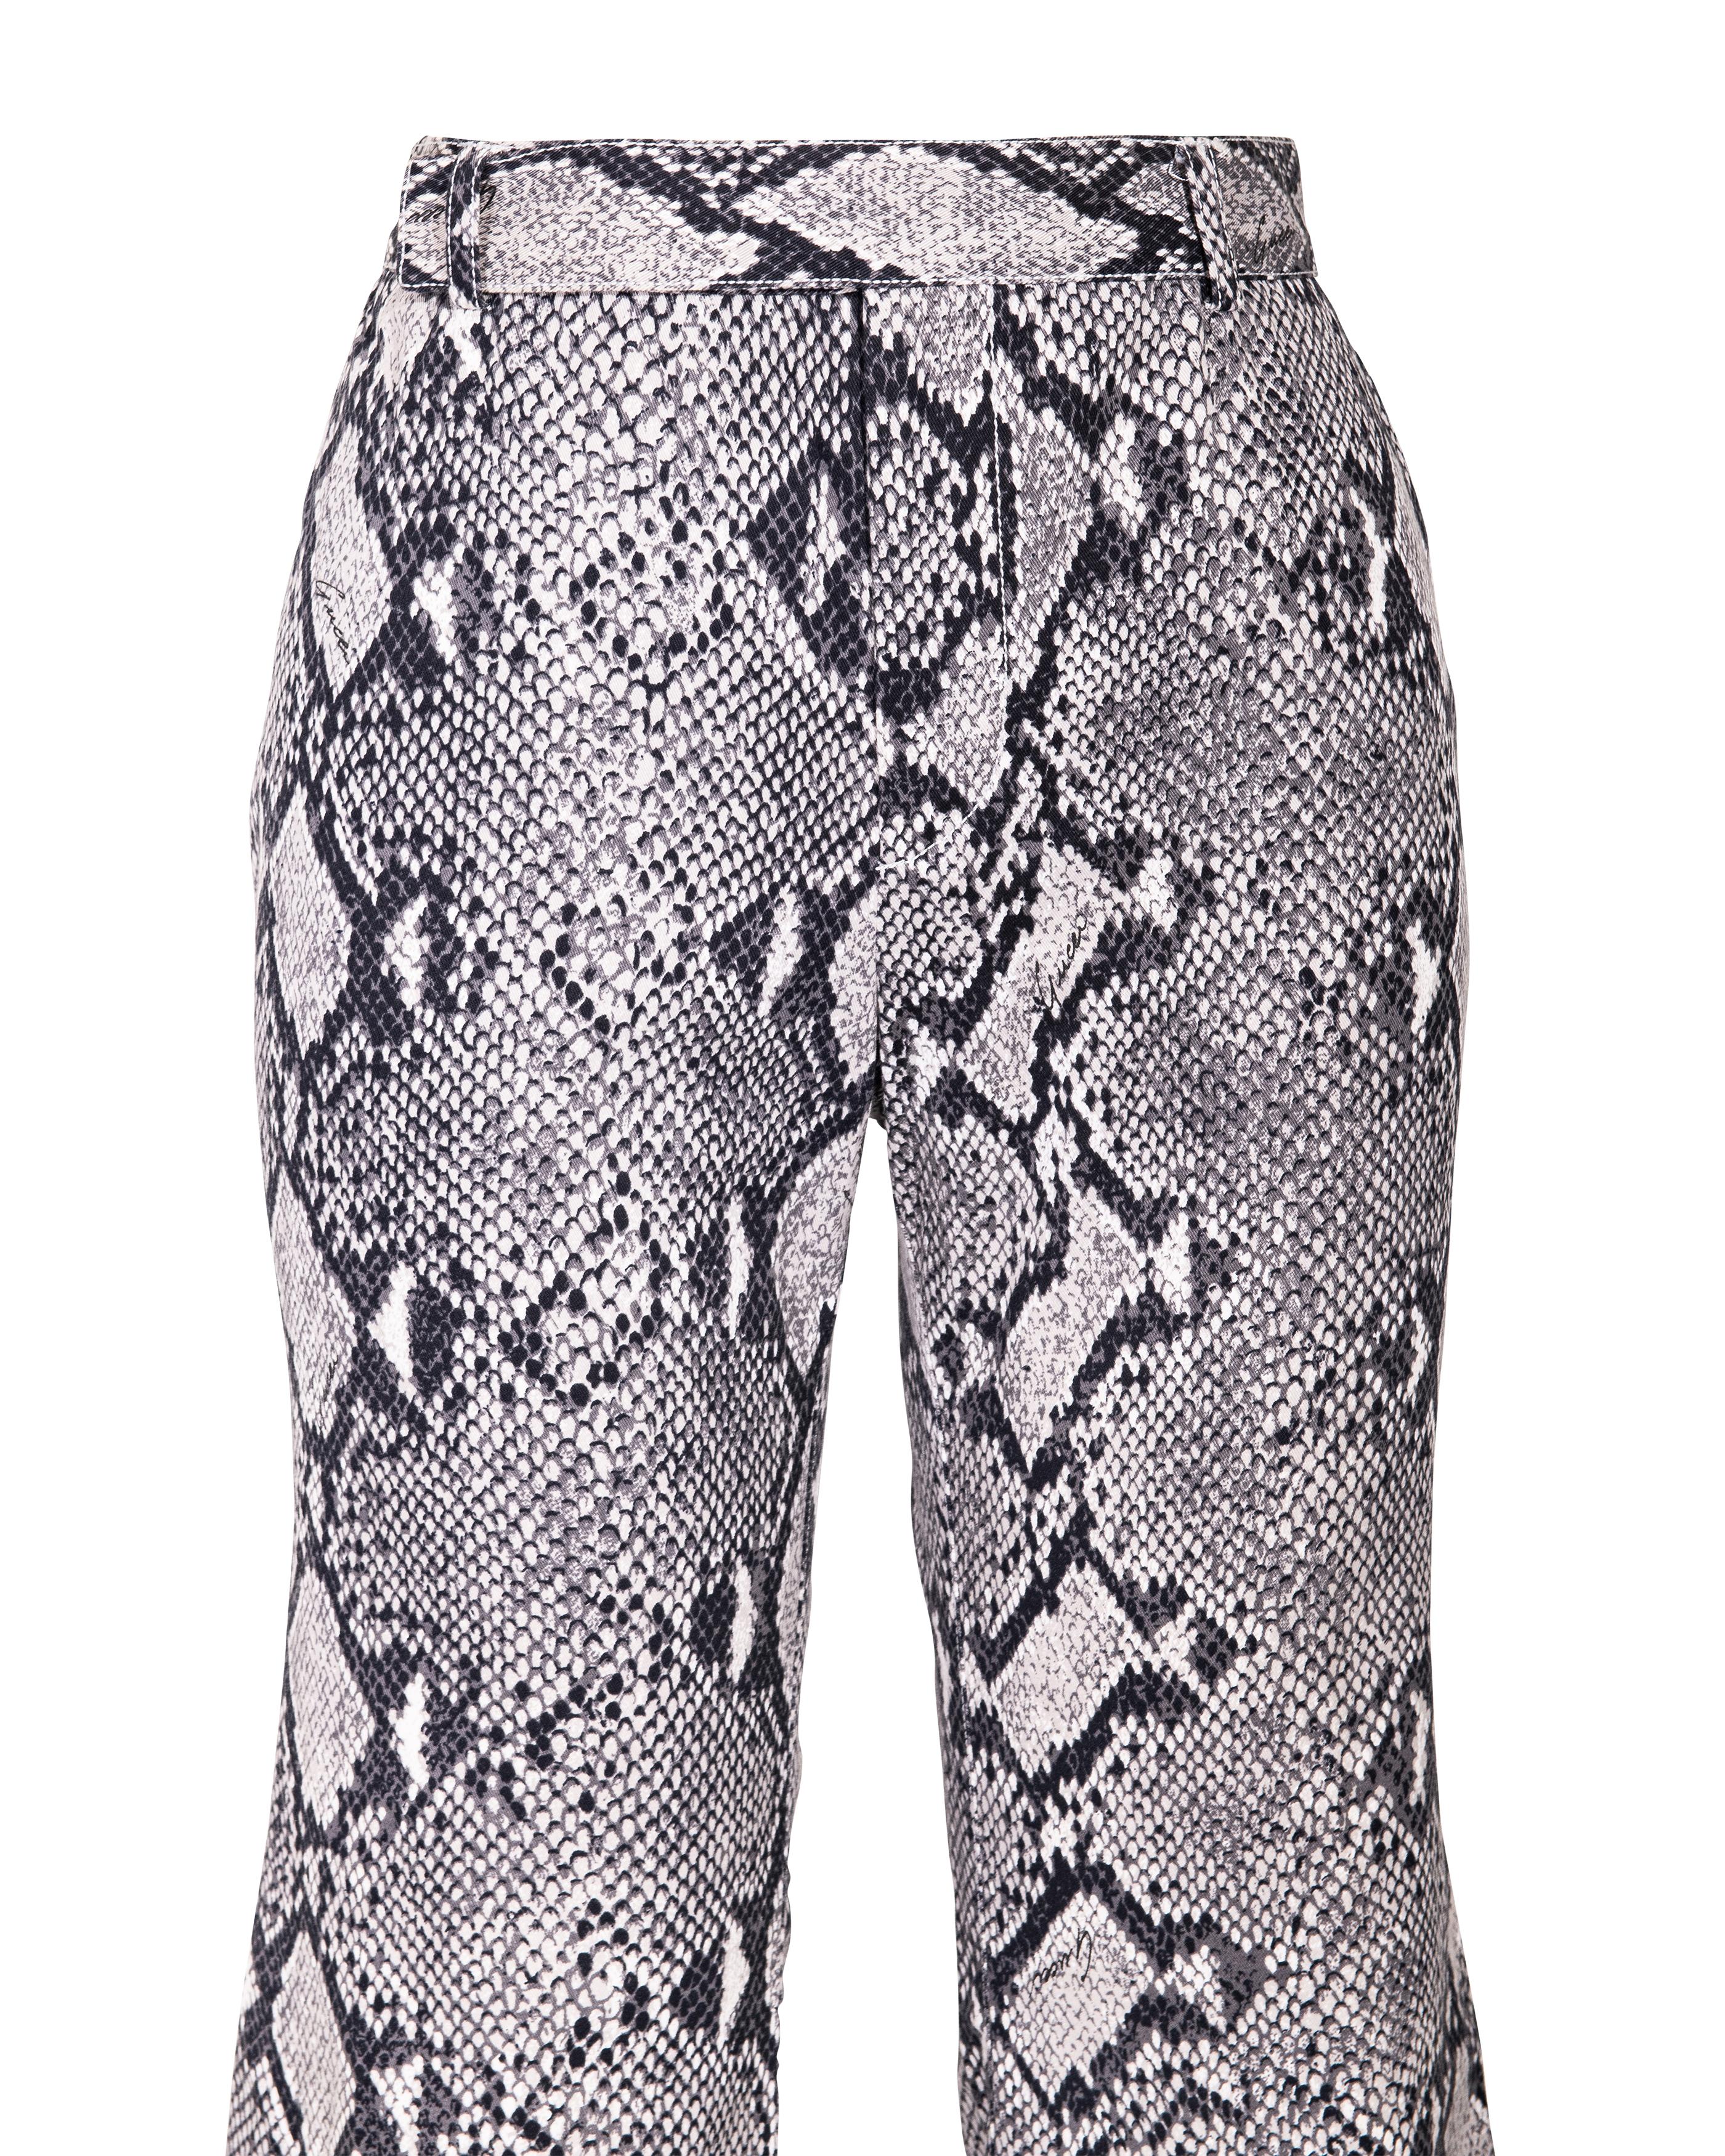 S/S 2000 Gucci by Tom Ford Gray Snakeskin Flare Trousers 1